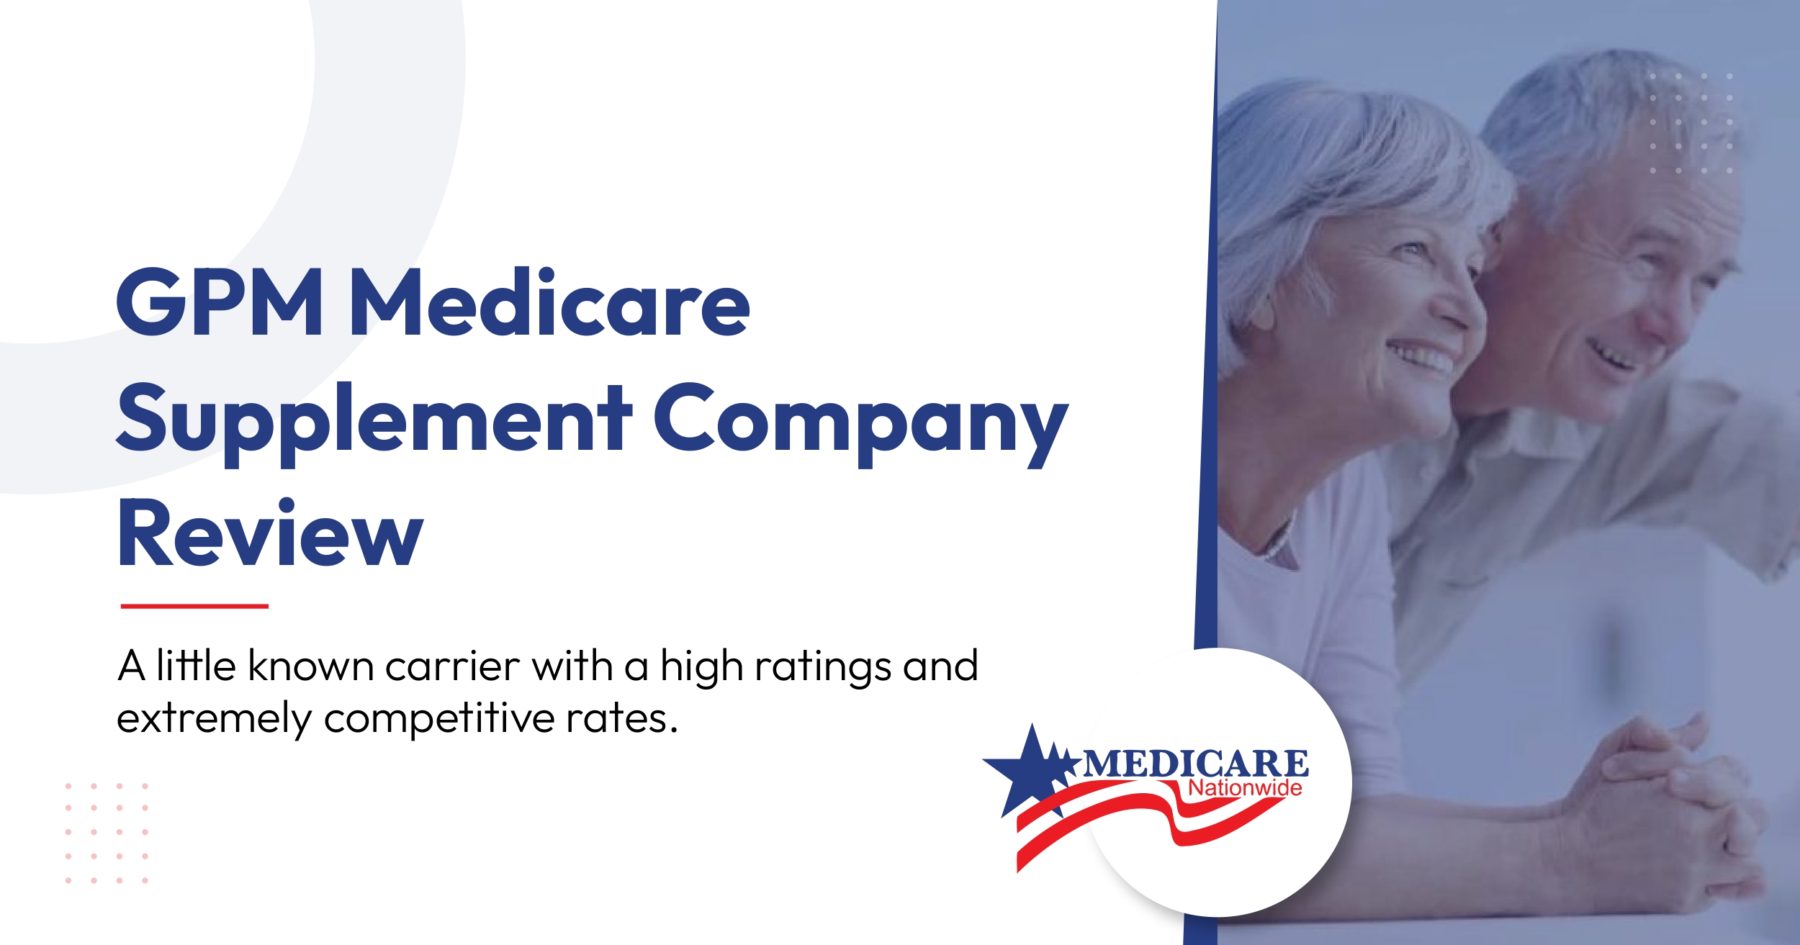 GPM Medicare Supplement Company Review